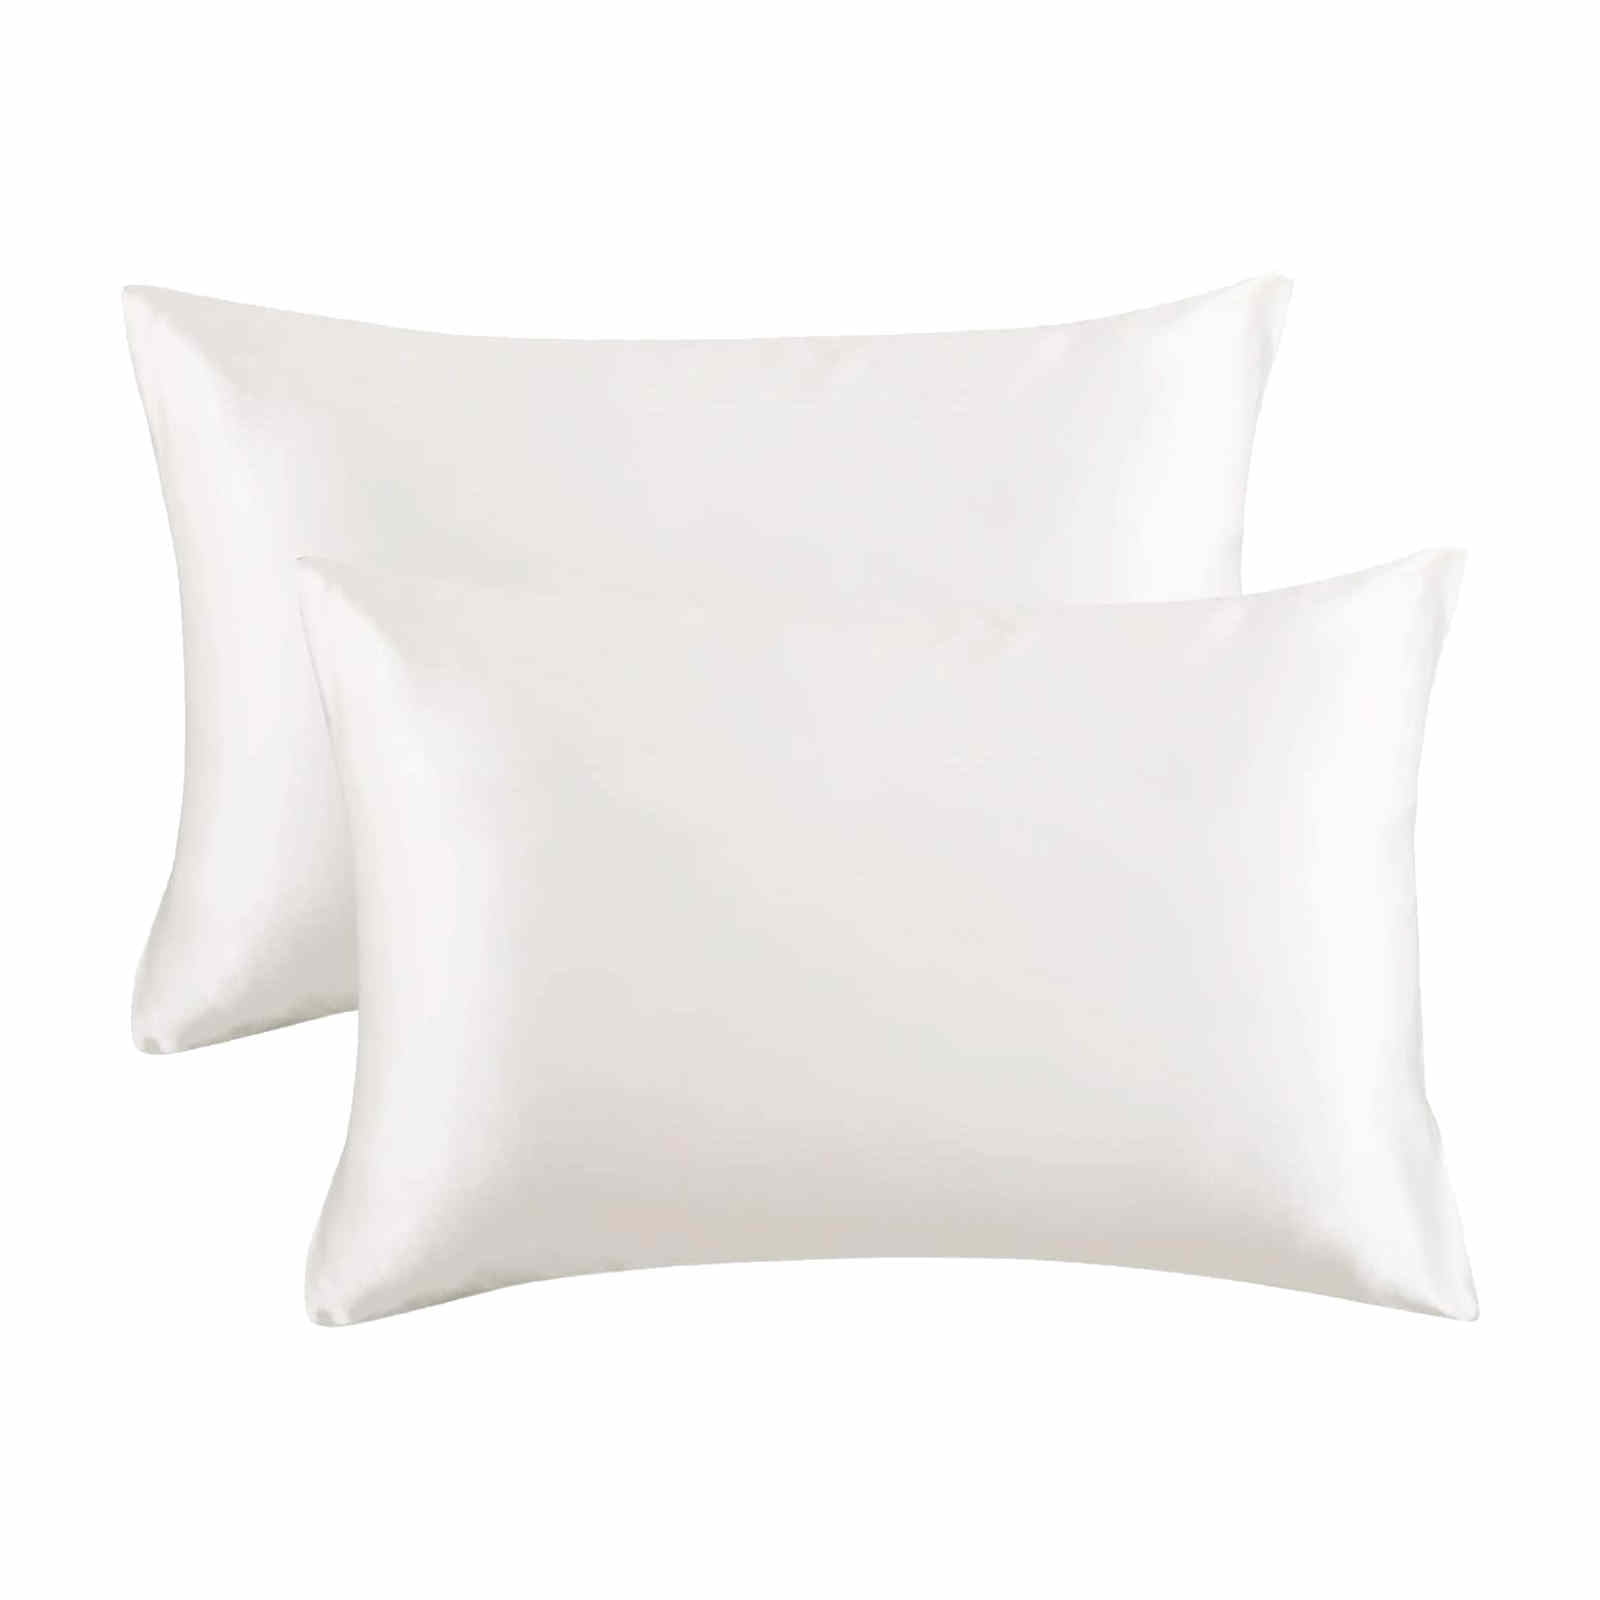 20x30 Inches Silk Satin Pillowcase Christmas Snowflake Suitable for Hair and Skin Winter Super Soft Anti-Wrinkle Pillow Covers with Envelope Closure